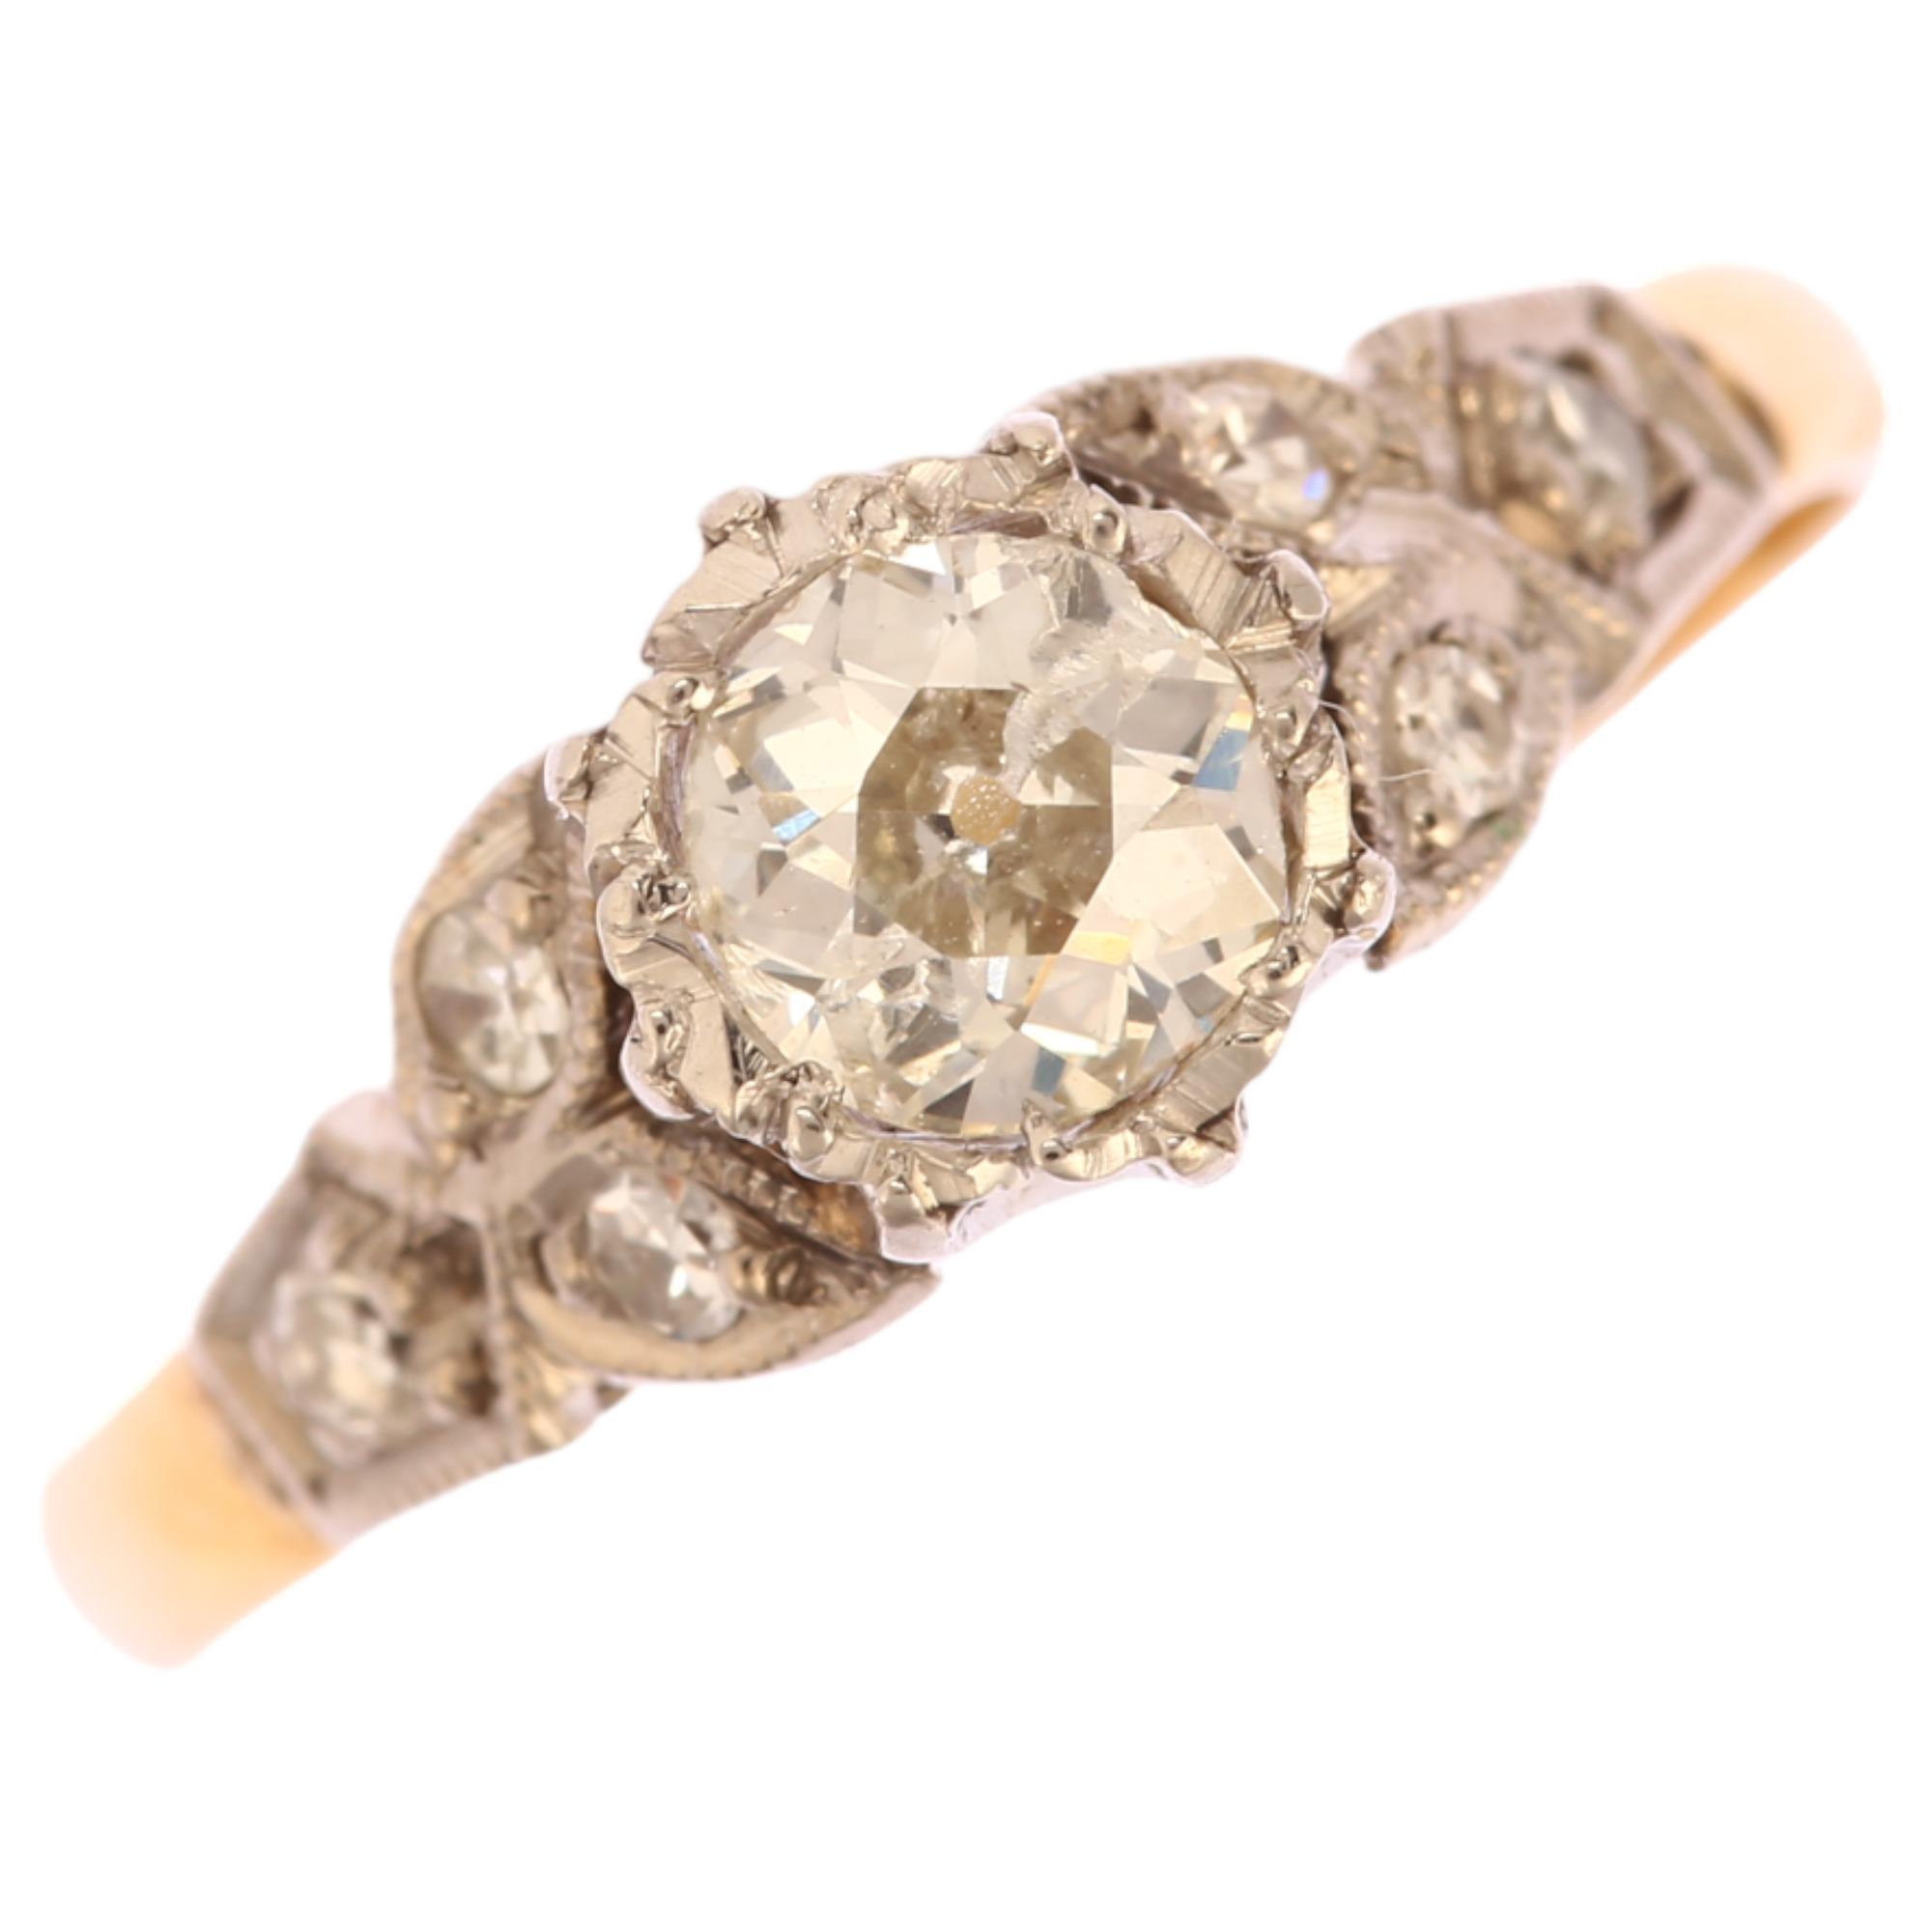 An 18ct gold 0.3ct solitaire diamond ring, platinum-topped illusion set with old European-cut